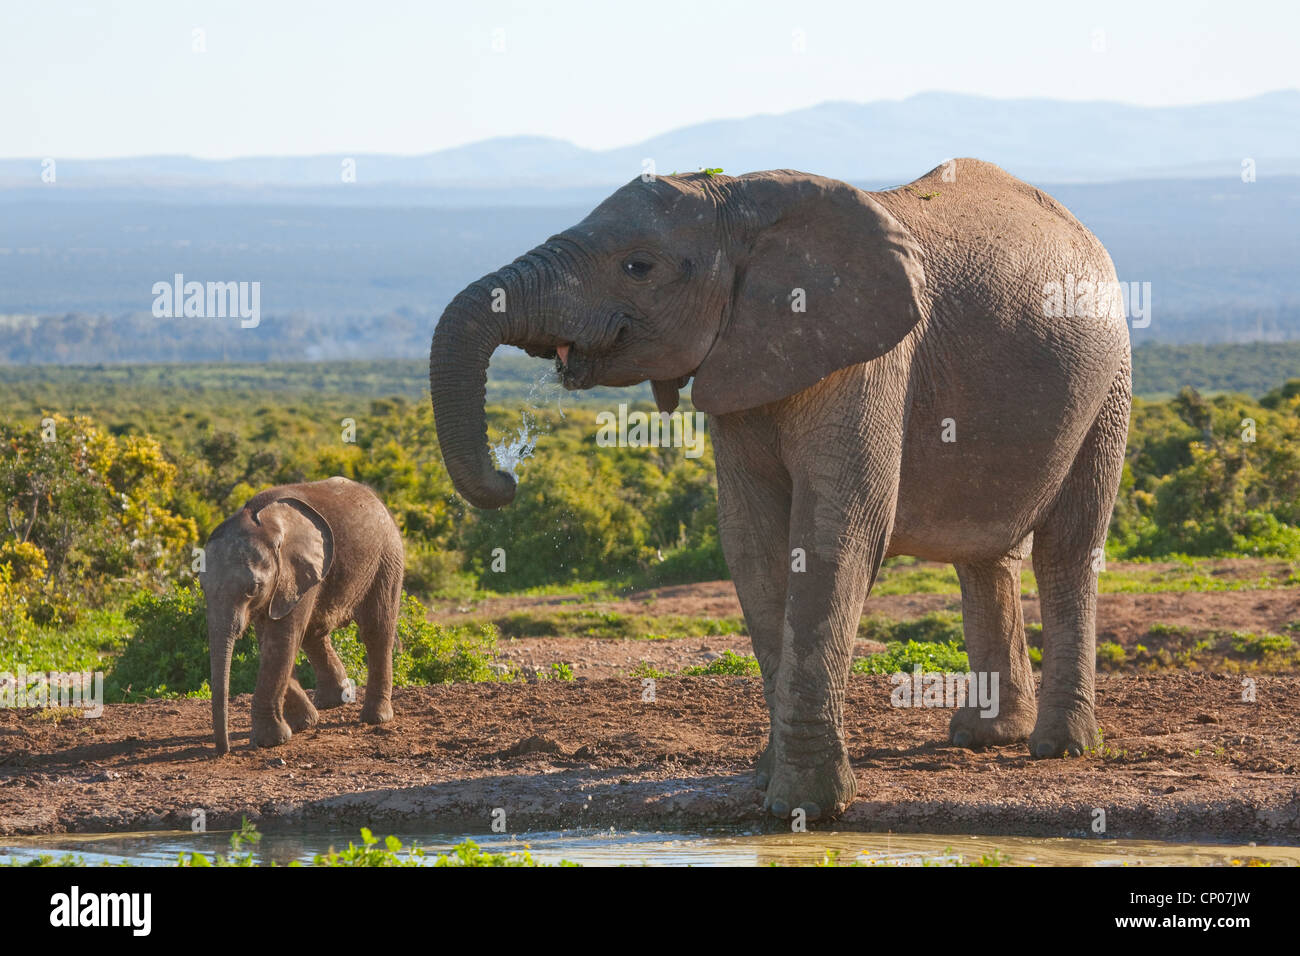 African elephant (Loxodonta africana), cow elephant with calf at waterhole, South Africa, Eastern Cape, Addo Elephant National Park Stock Photo